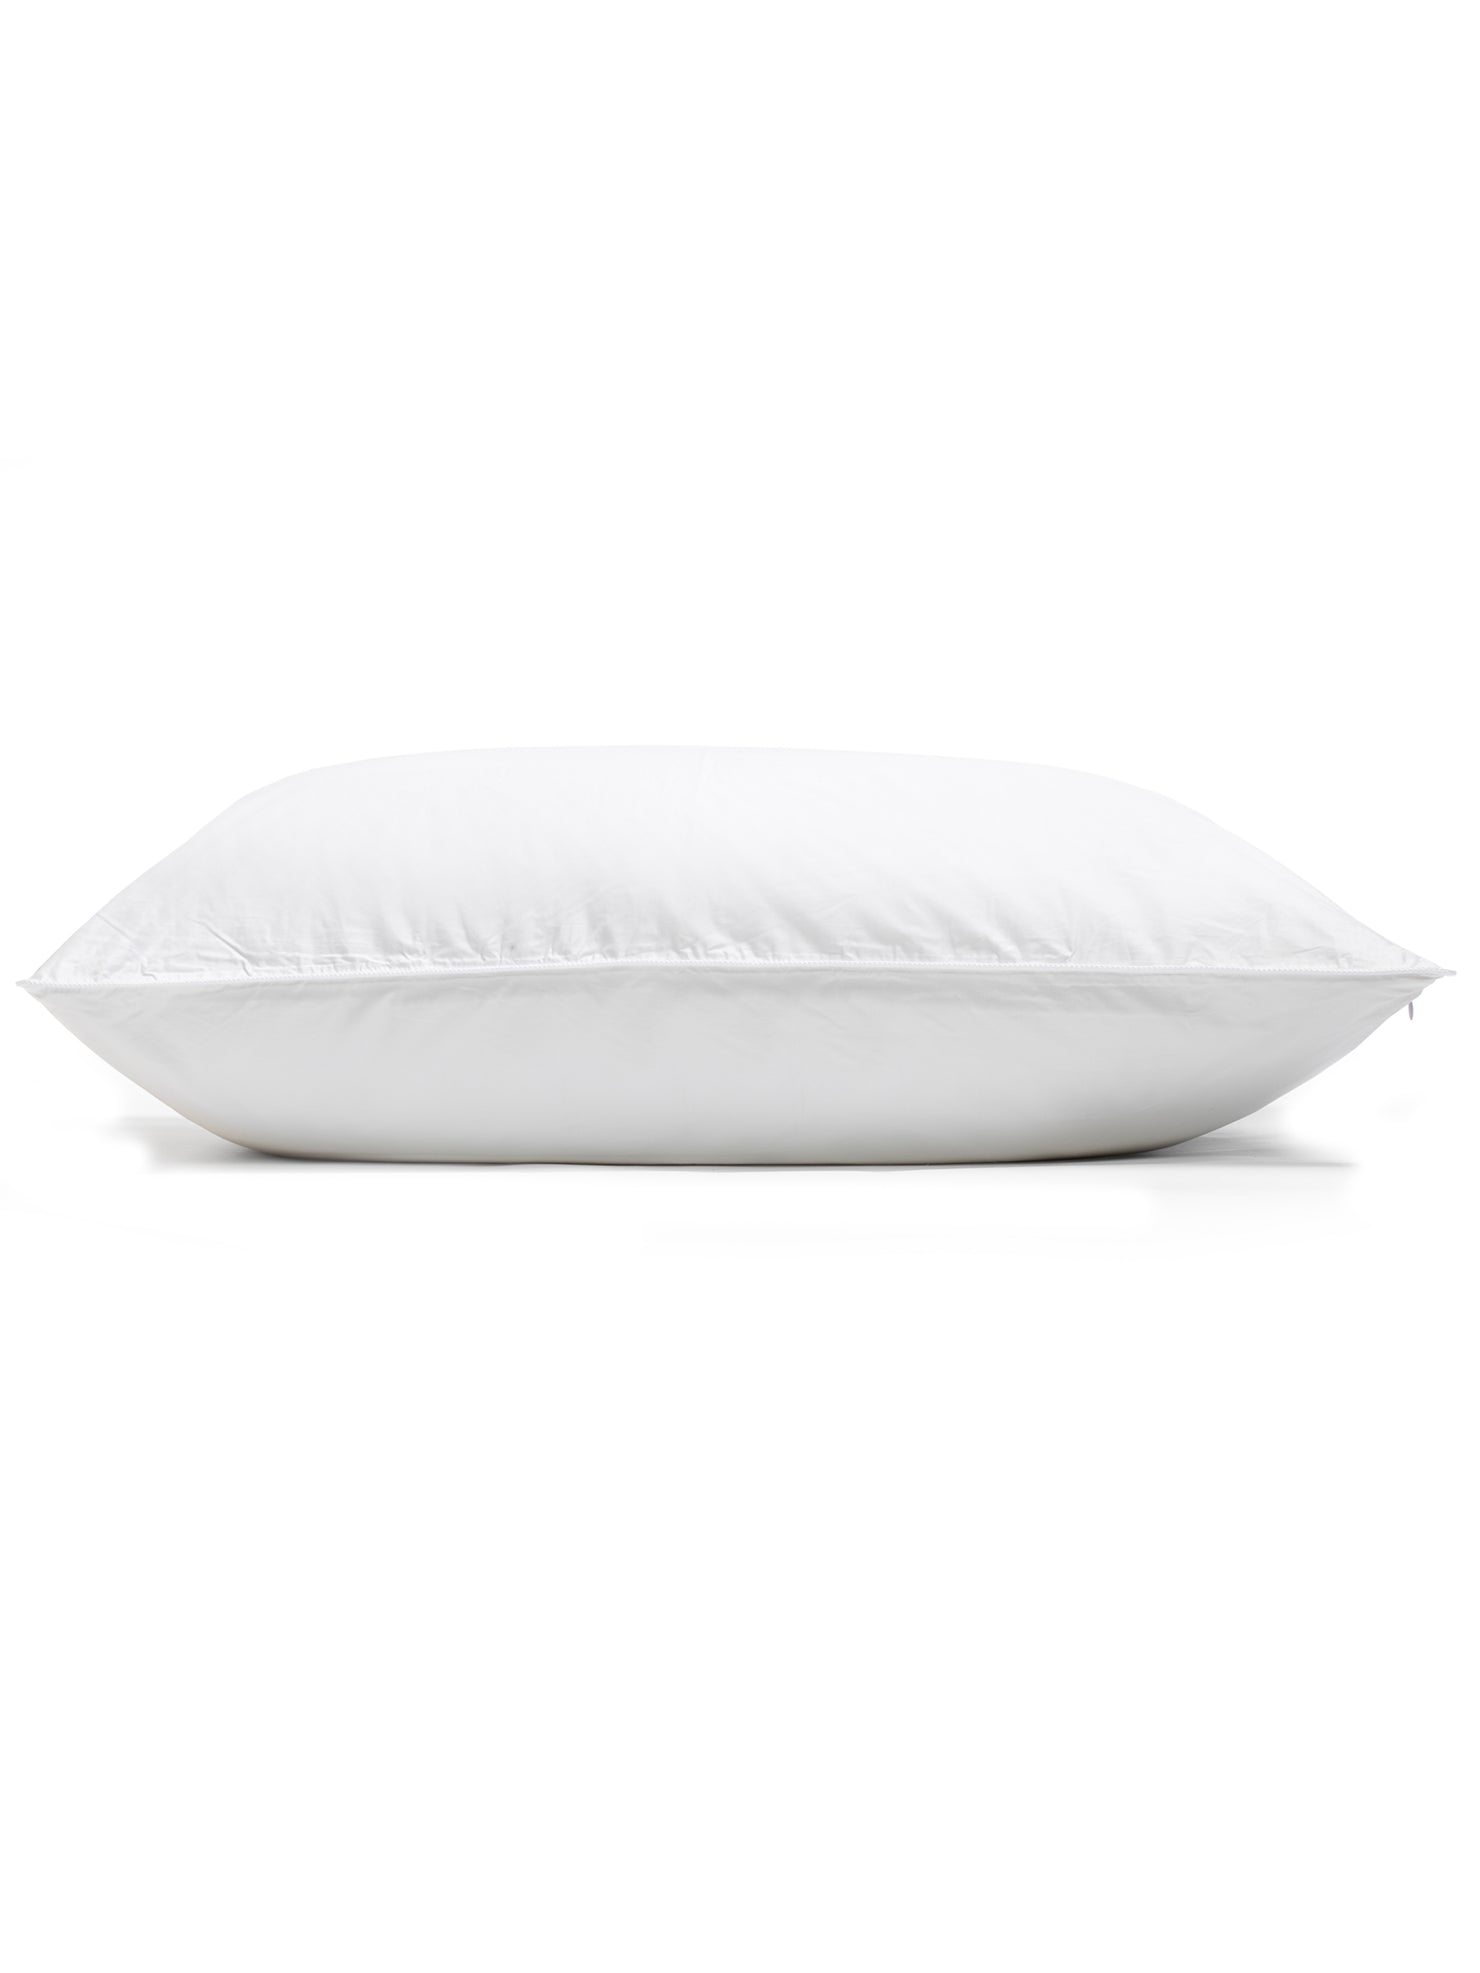 DOLCE pillows – Dolce & Bianca